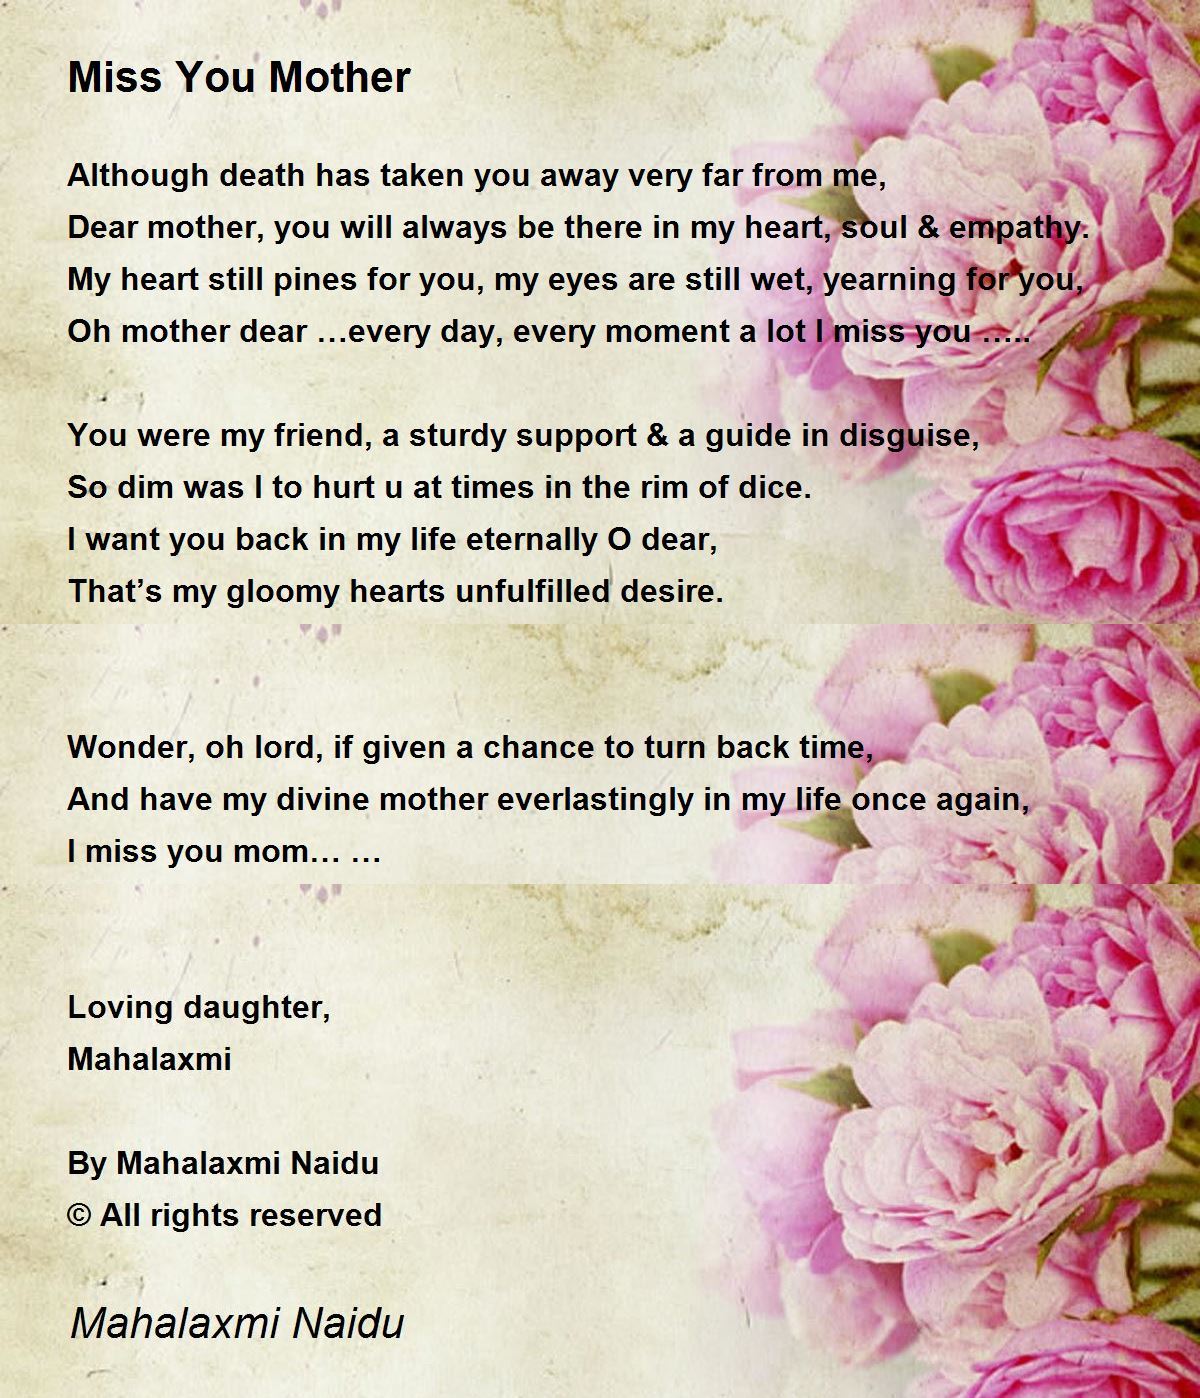 Miss You Mother - Miss You Mother Poem by Mahalaxmi Naidu